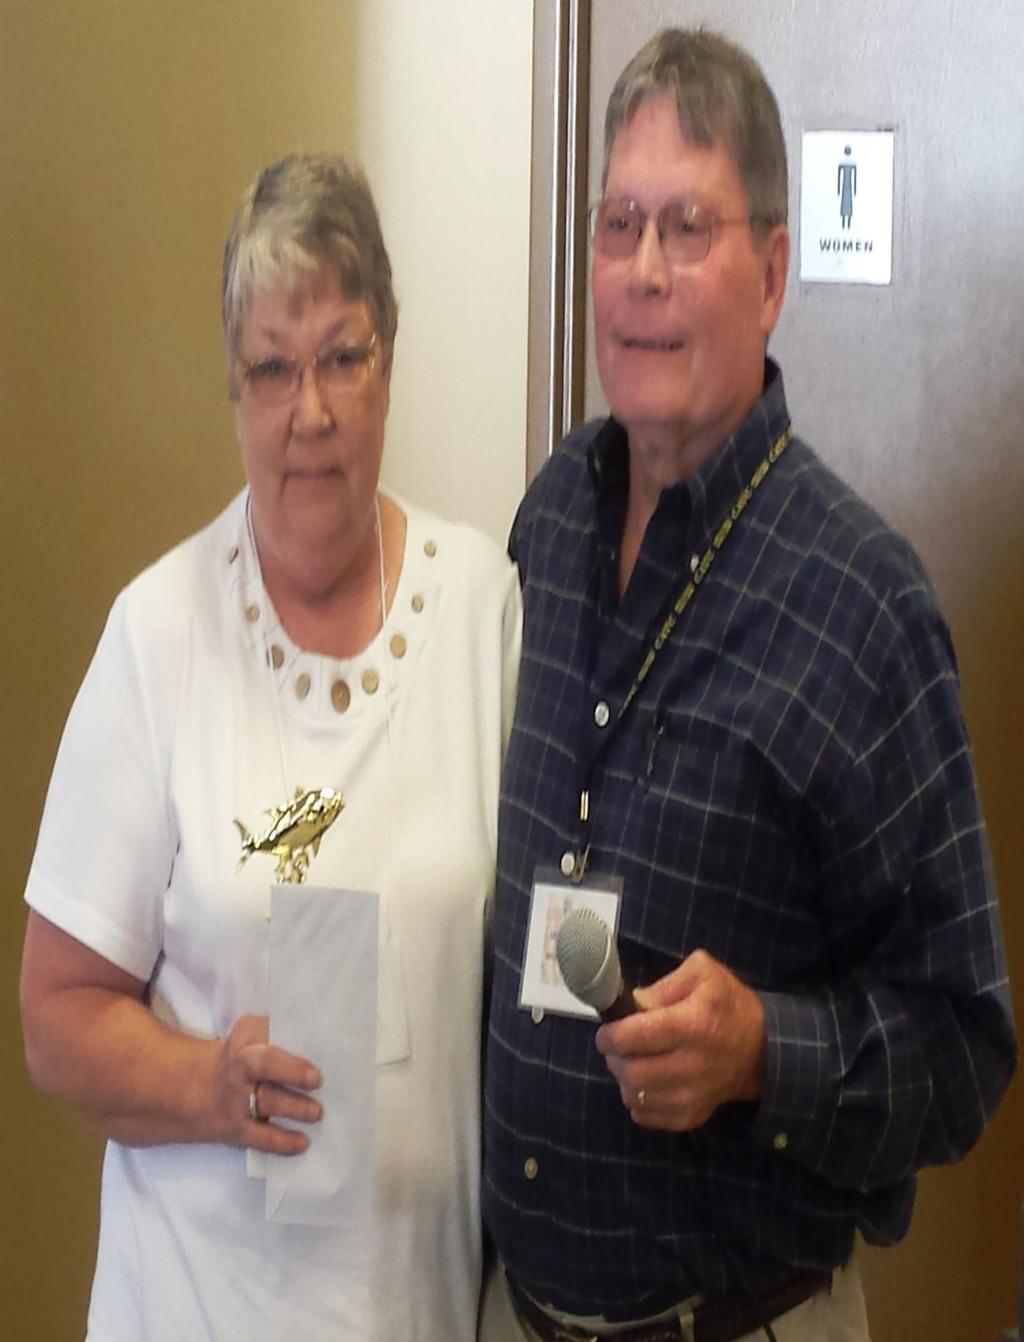 Sharon Hensley Gene McIntyre Steve Barrow Carolina Antique Tackle Collectors Current Events By Steve Barrow 2015 Myrtle Beach Show Gene and Suzann and all the other volunteers did a great job again